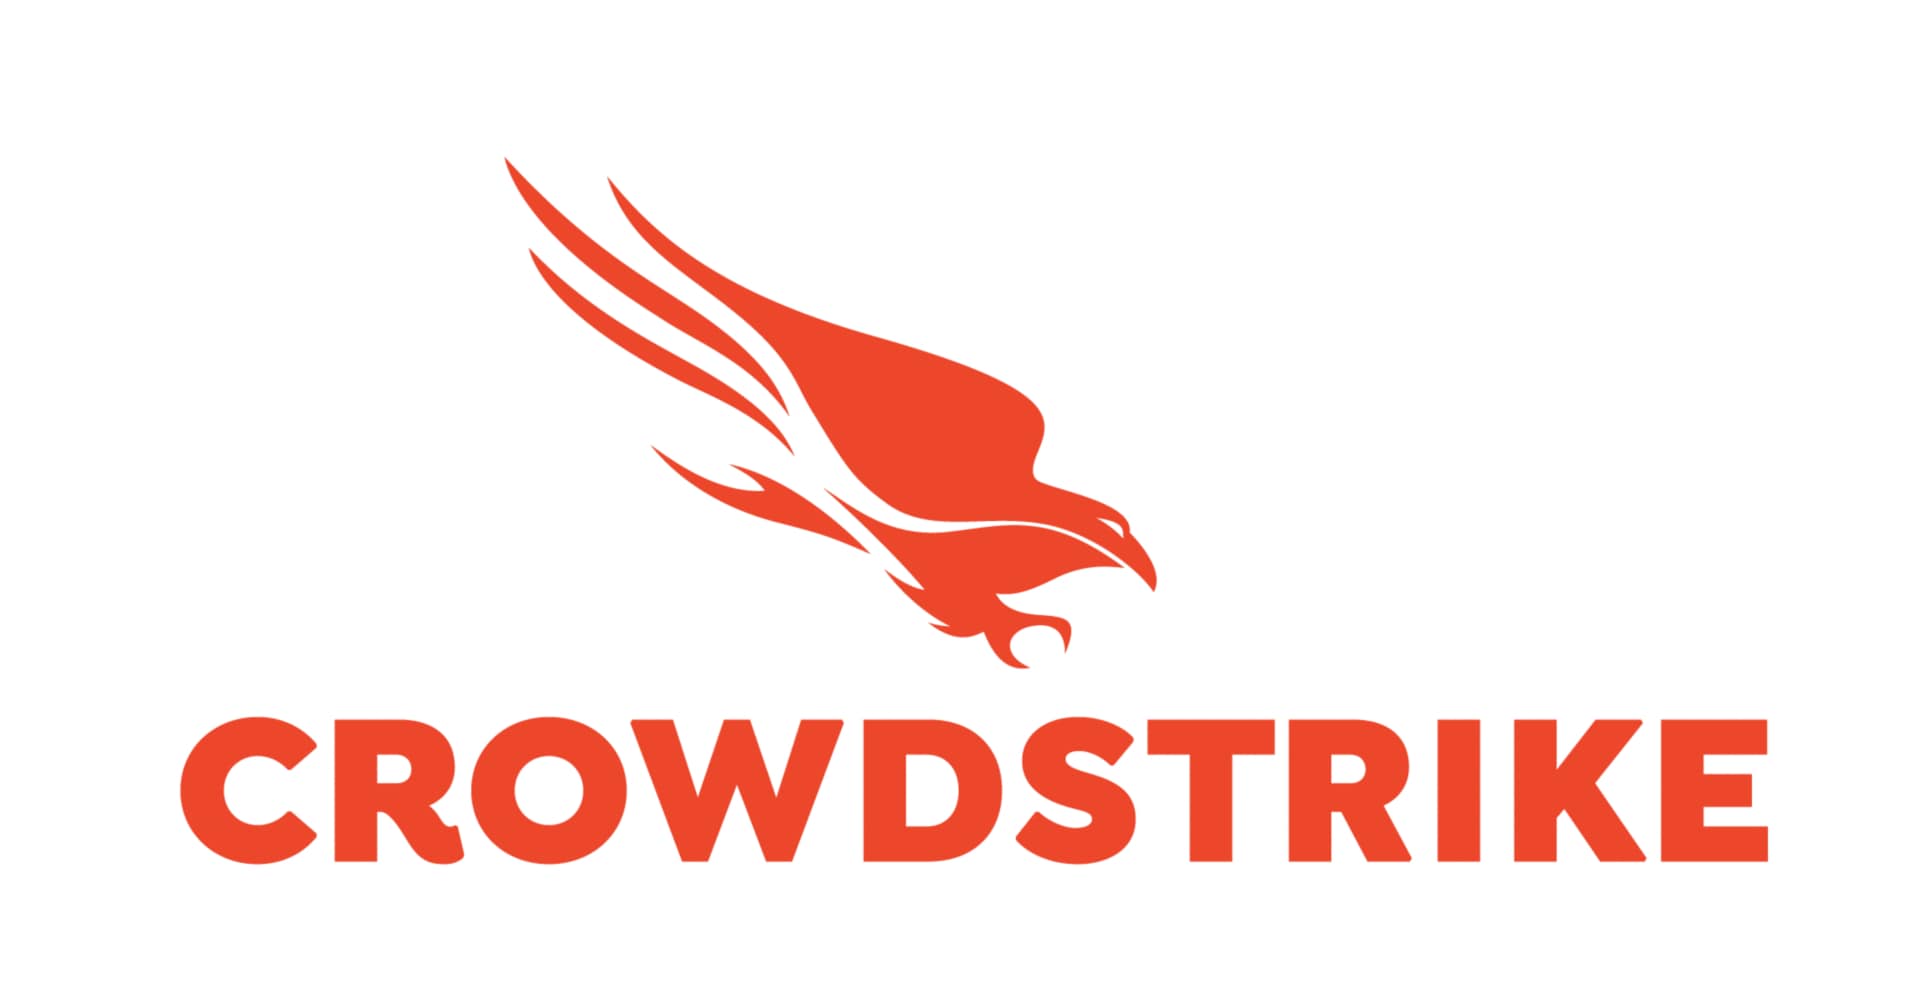 CrowdStrike 24-Month Falcon Overwatch Service (500-749 Licenses)